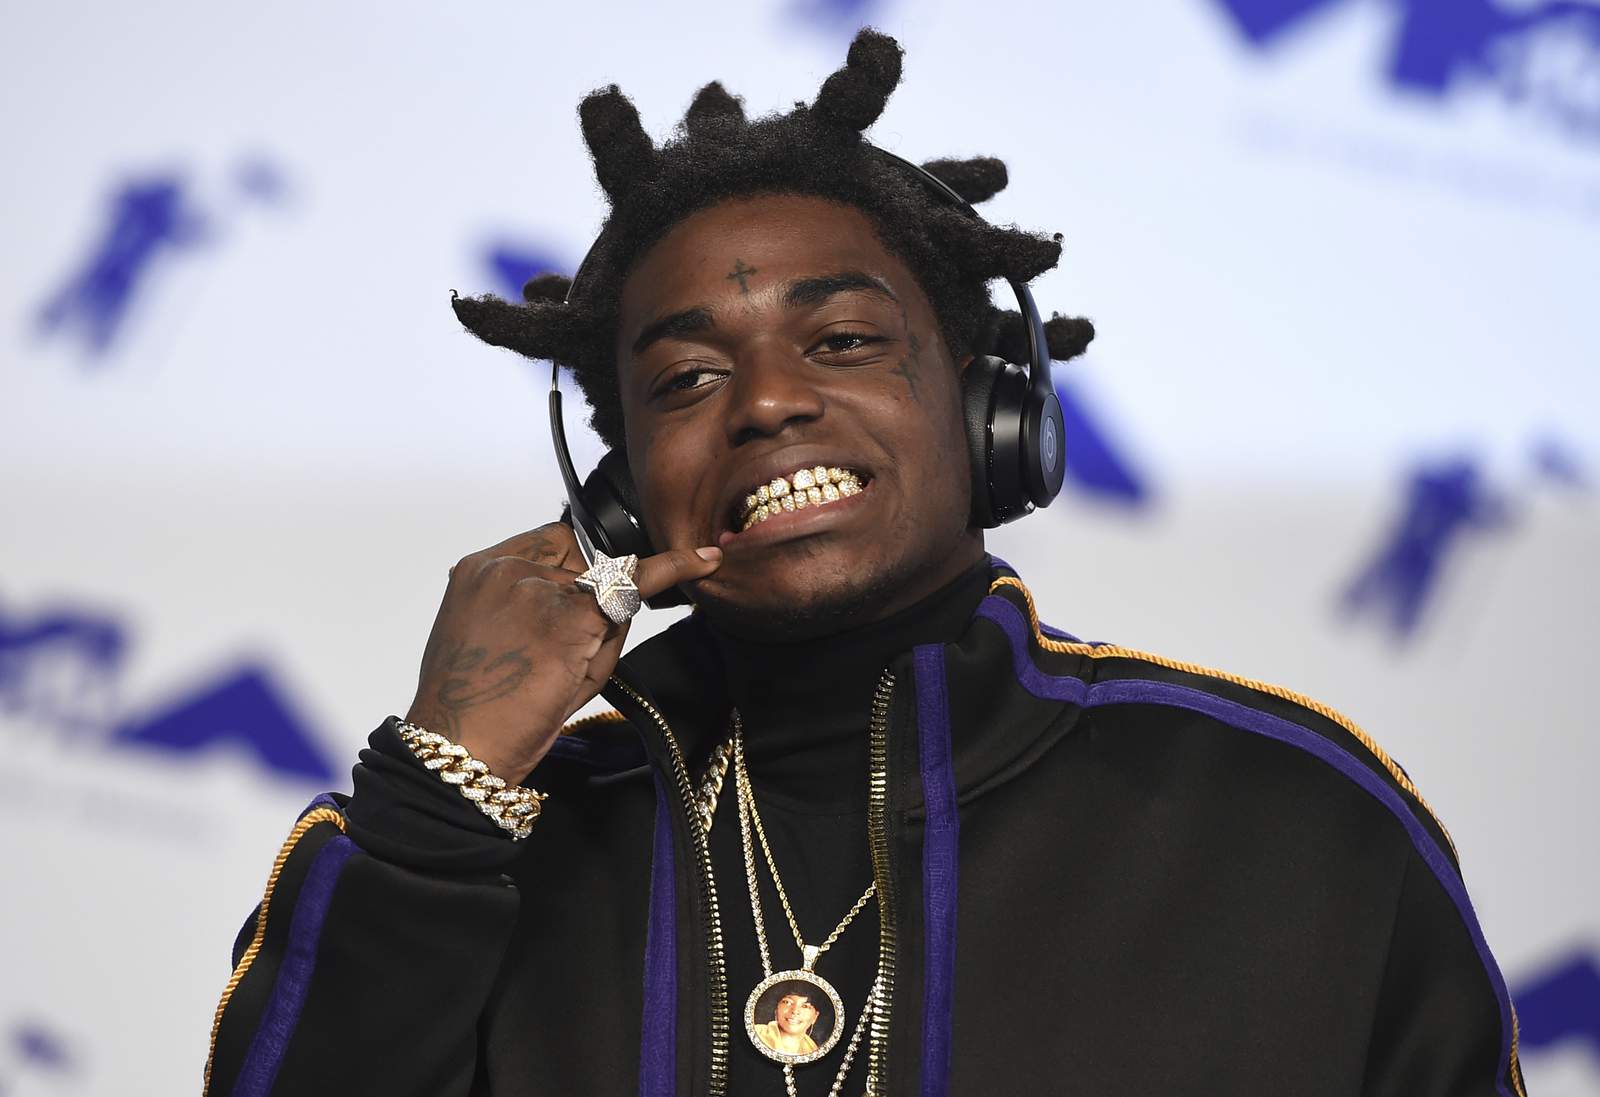 Kodak Black offers to pay college tuition for fallen FBI agents’ kids, reports say